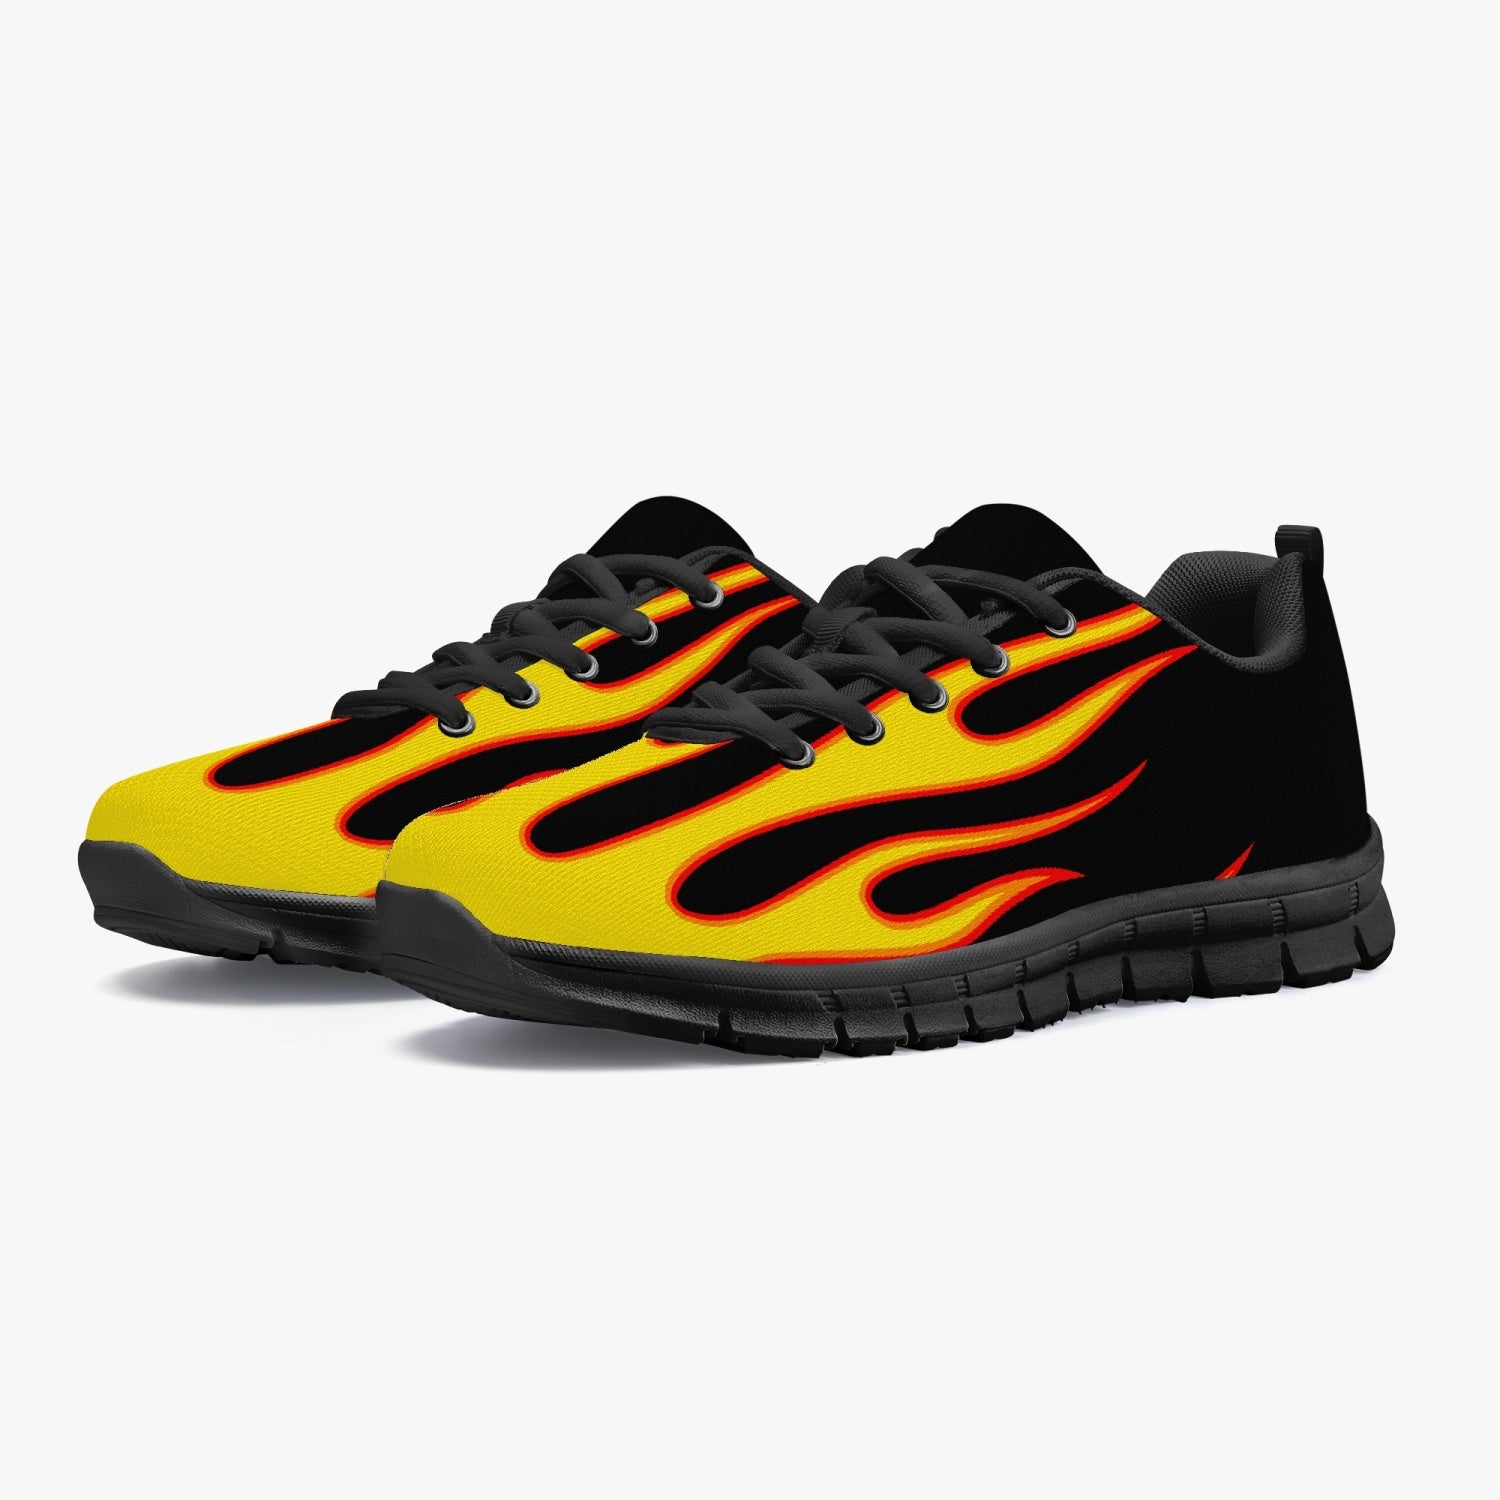 Women's Classic Hot Rod Fire Flames Drip Gym Workout Sneakers Overview